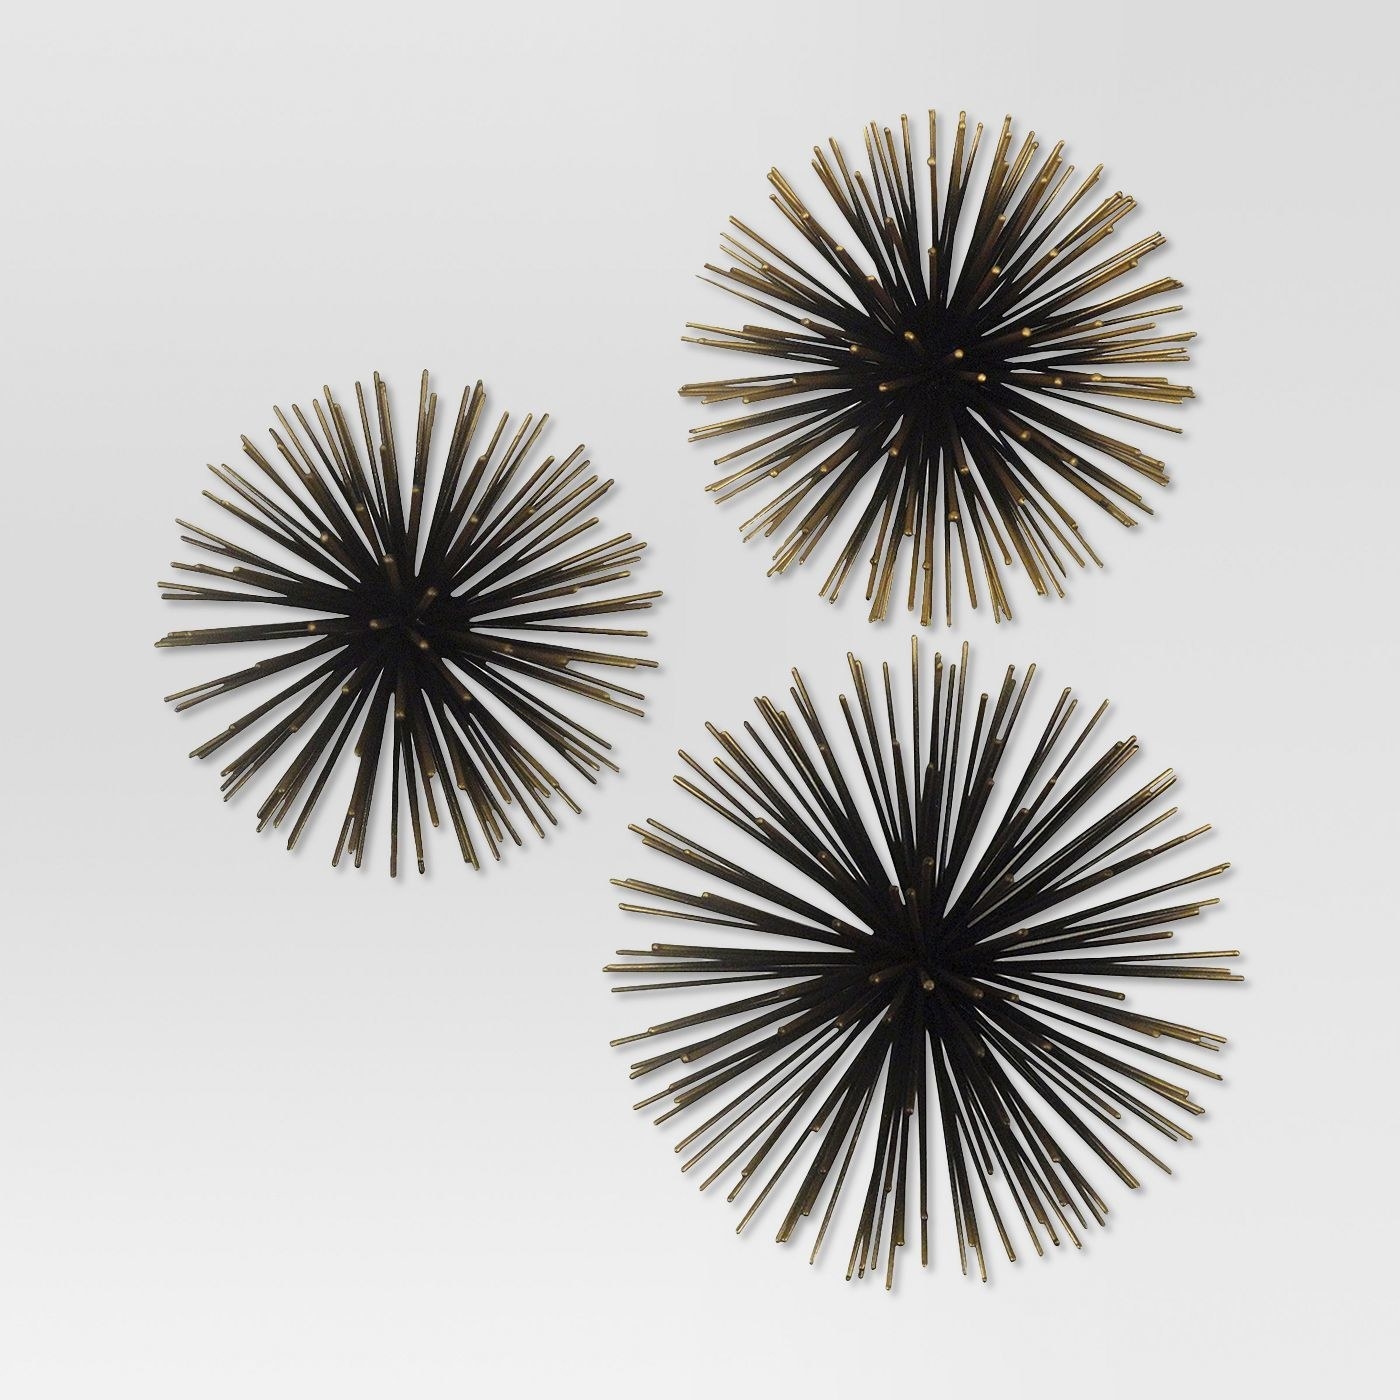 The wall decor elements, which have black and gold &quot;spines&quot; jutting out from the center, and are hung flat on the wall